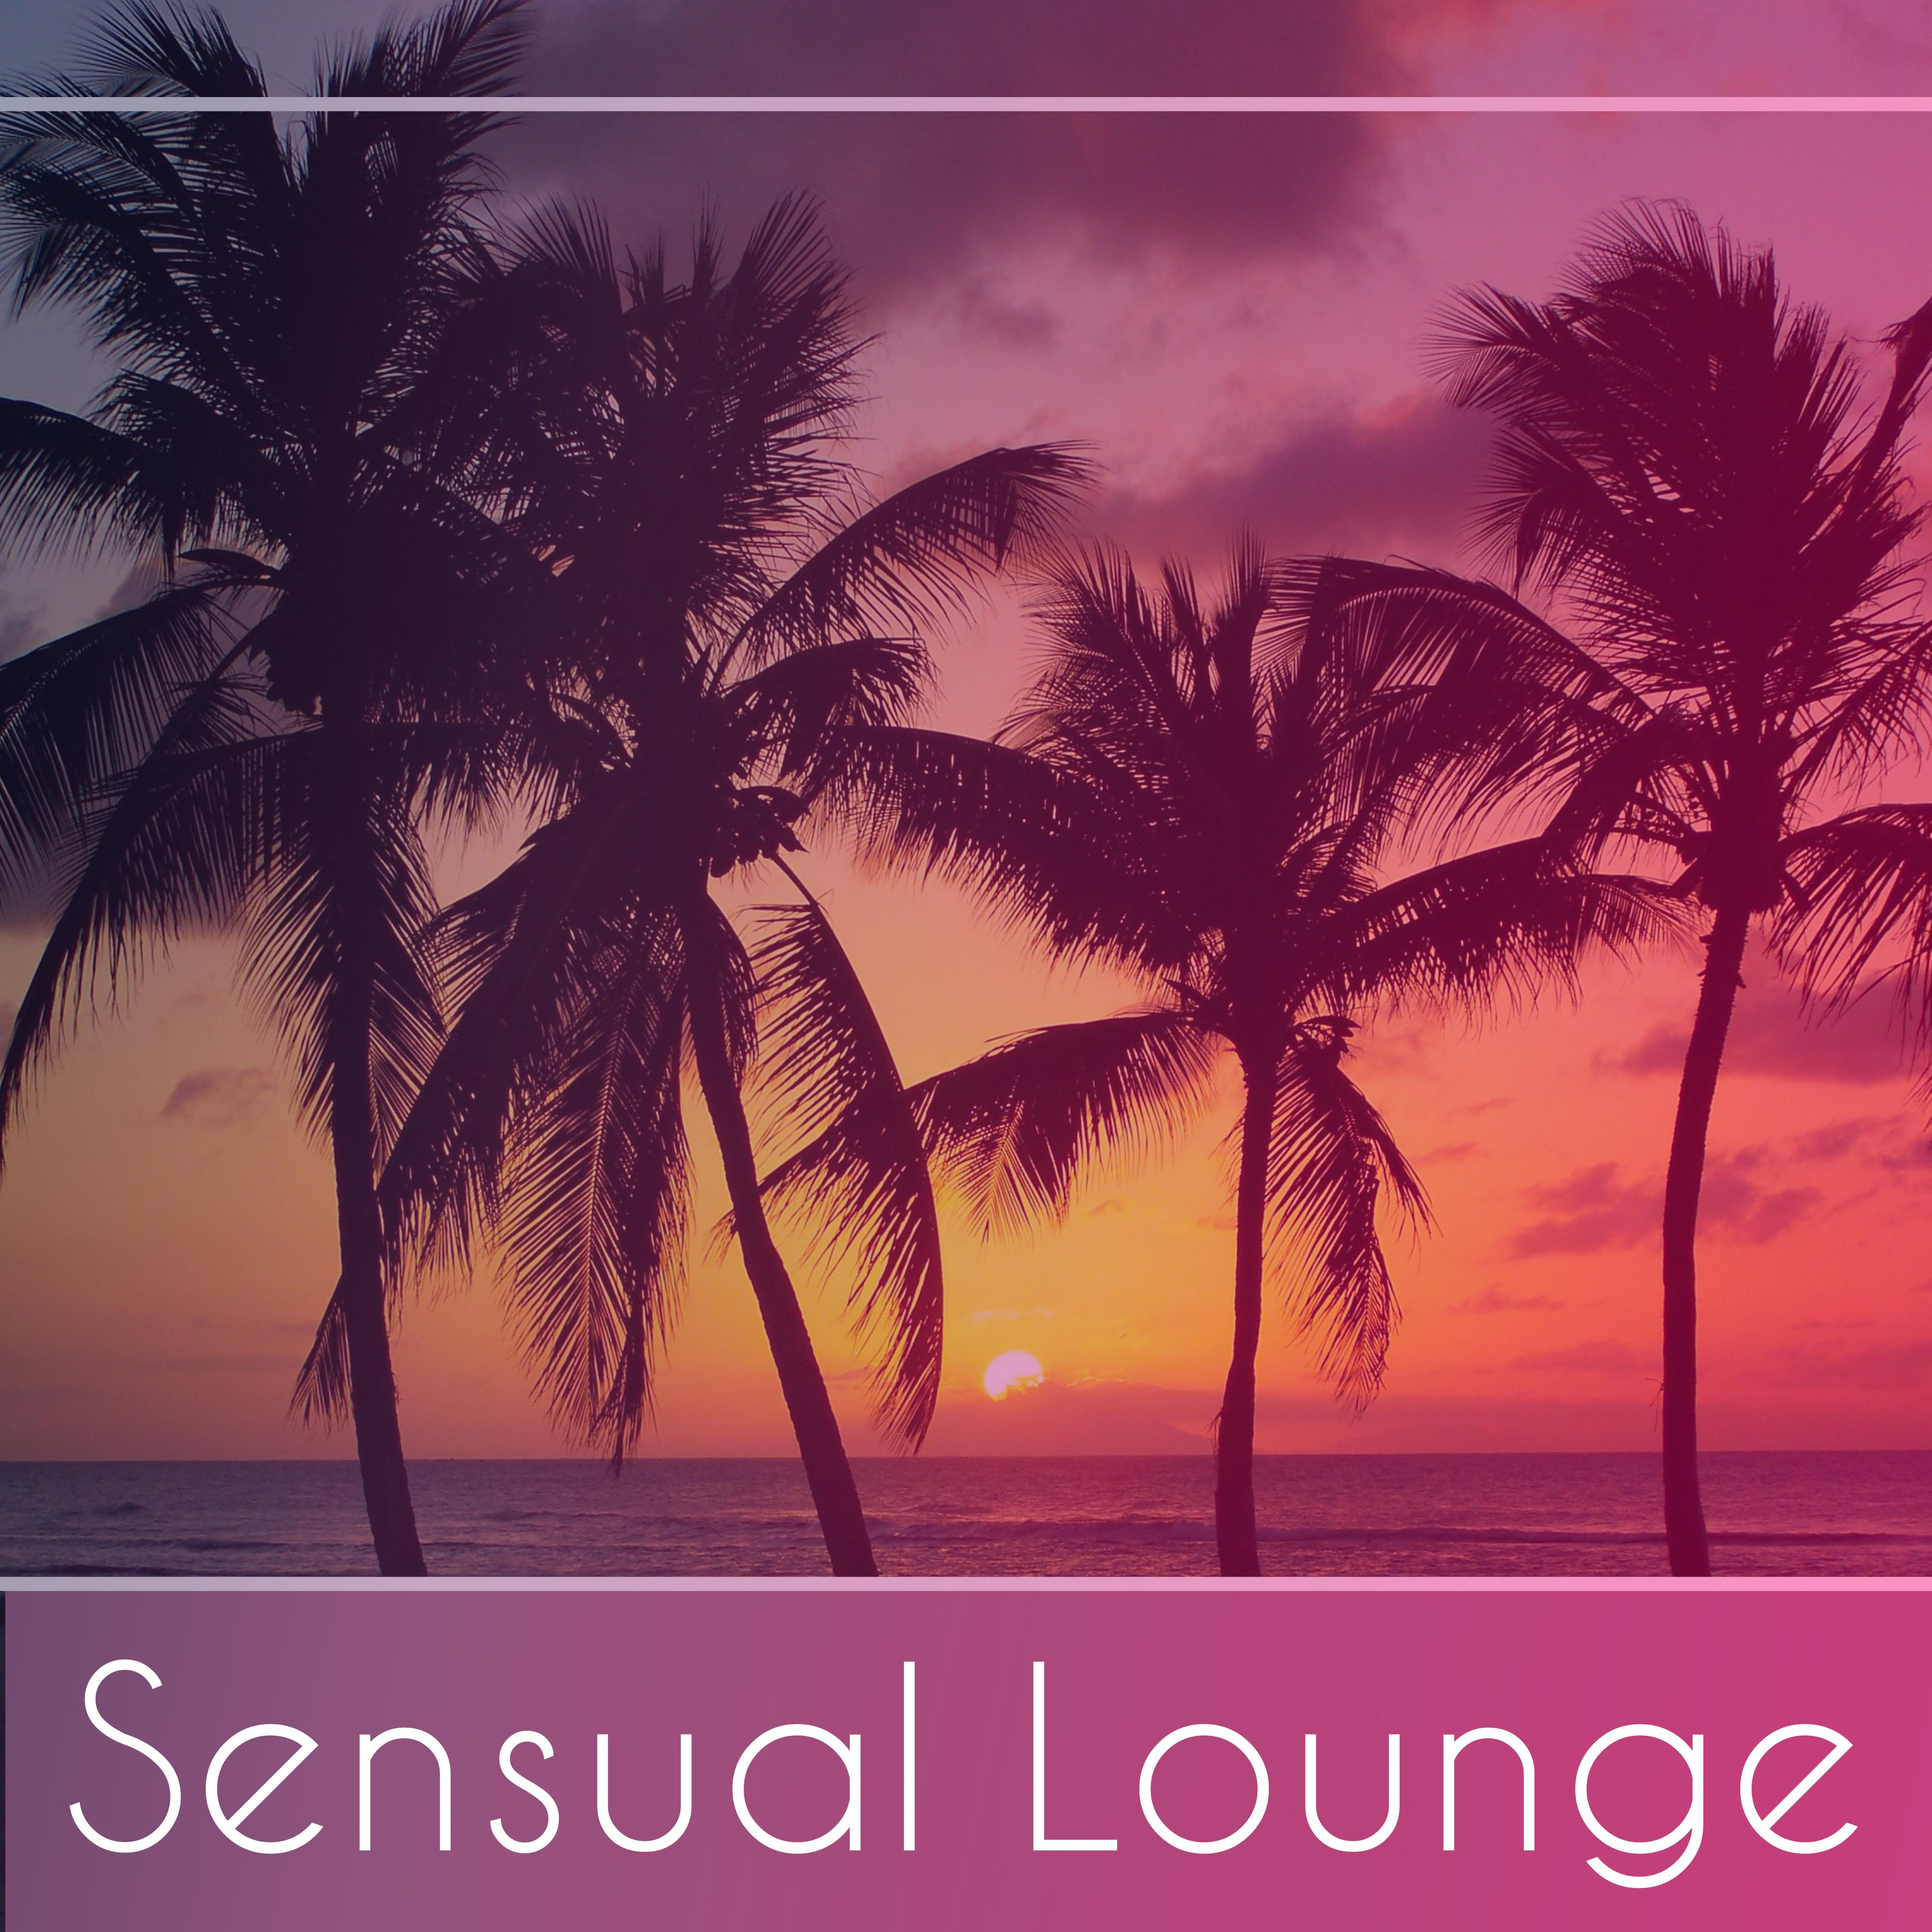 Sensual Lounge – Chillout Music, Erotic Dance, Relaxing Chill, Summertime, Total Relax